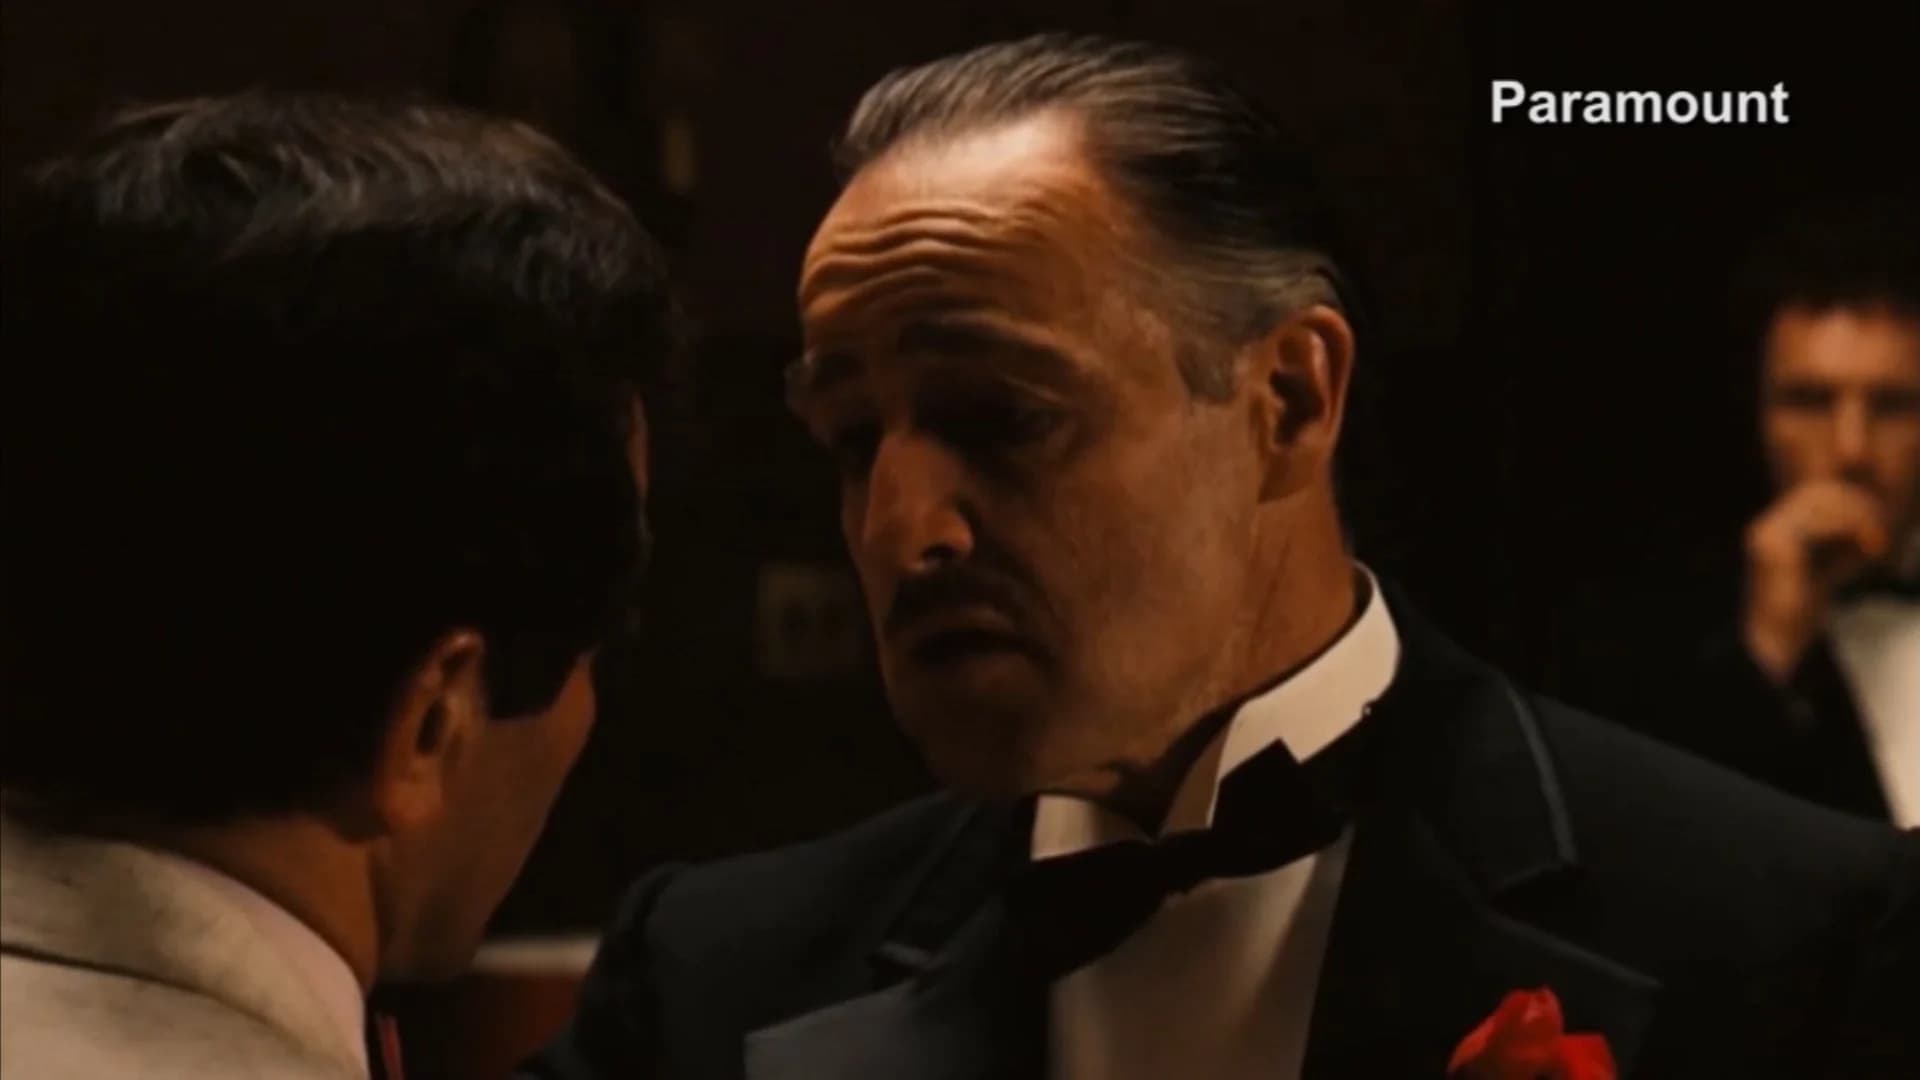 Avon Theatre to show special event screening of ‘The Godfather’